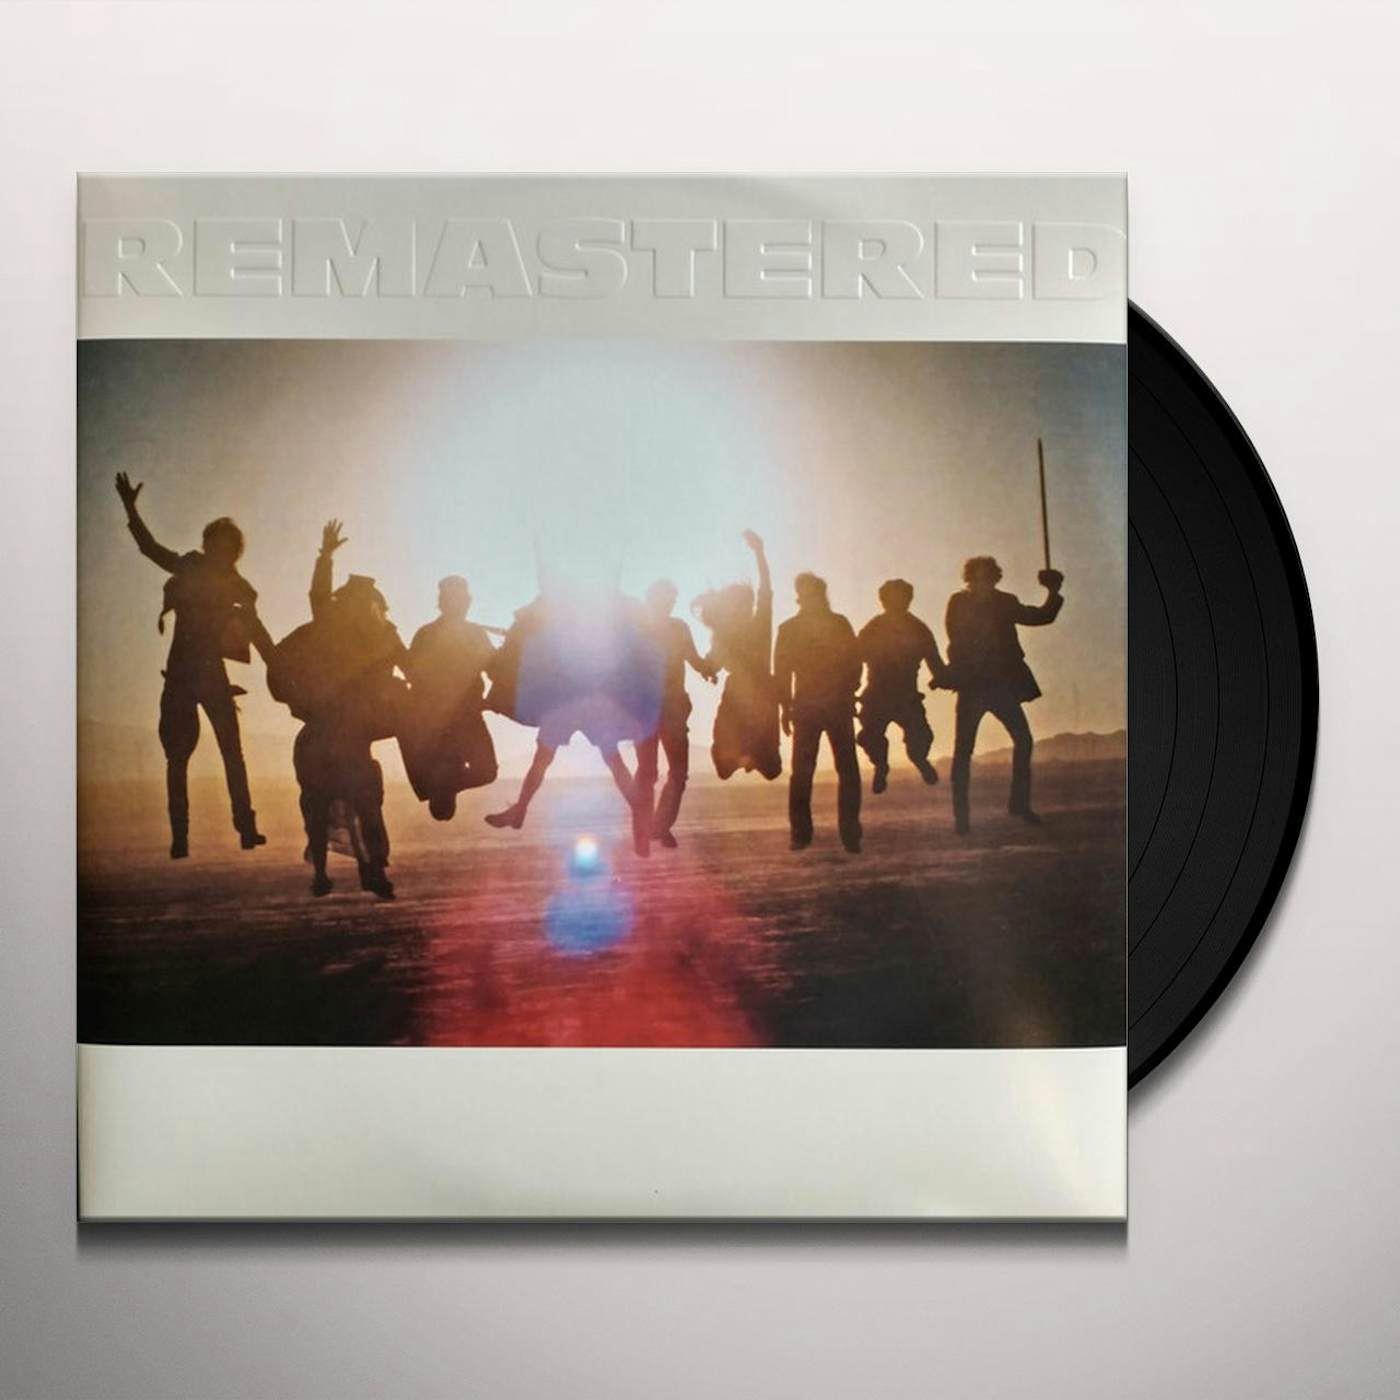 Edward Sharpe & The Magnetic Zeros UP FROM BELOW - 10TH ANNIVERSARY Vinyl Record